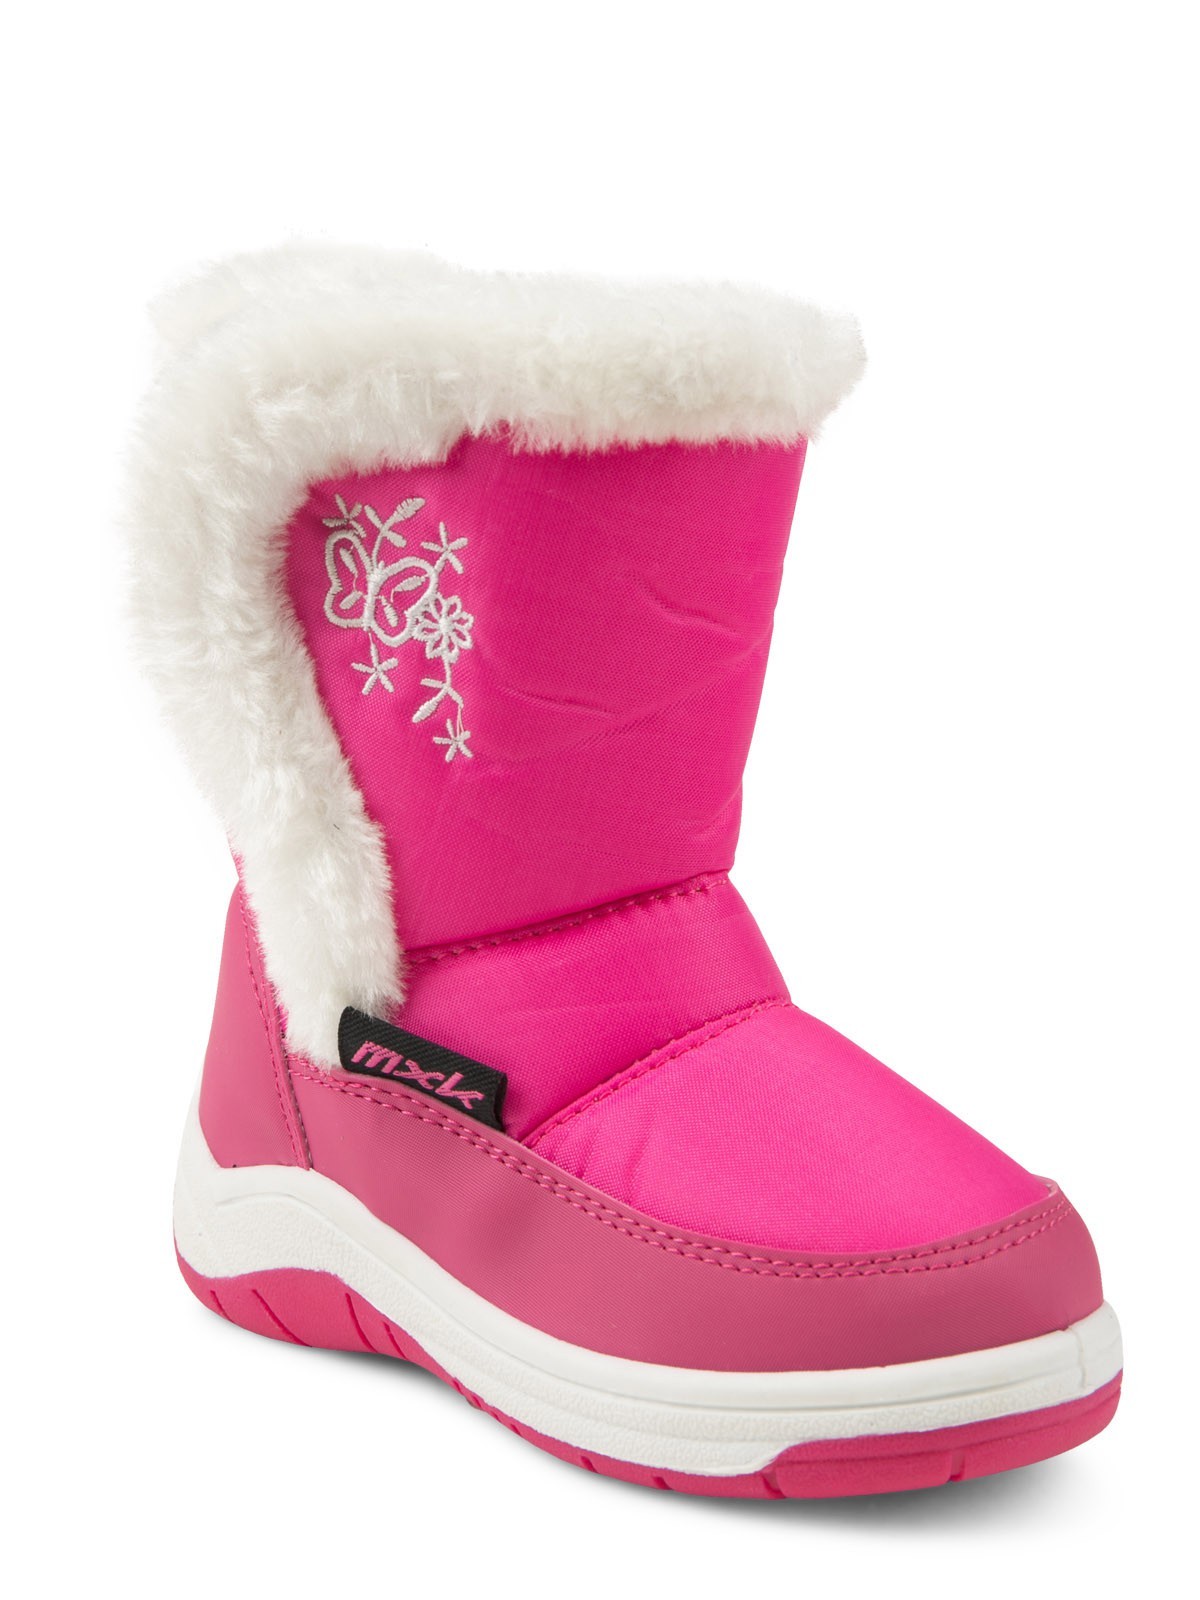 Chaussures Ski Bebe Buy Clothes Shoes Online